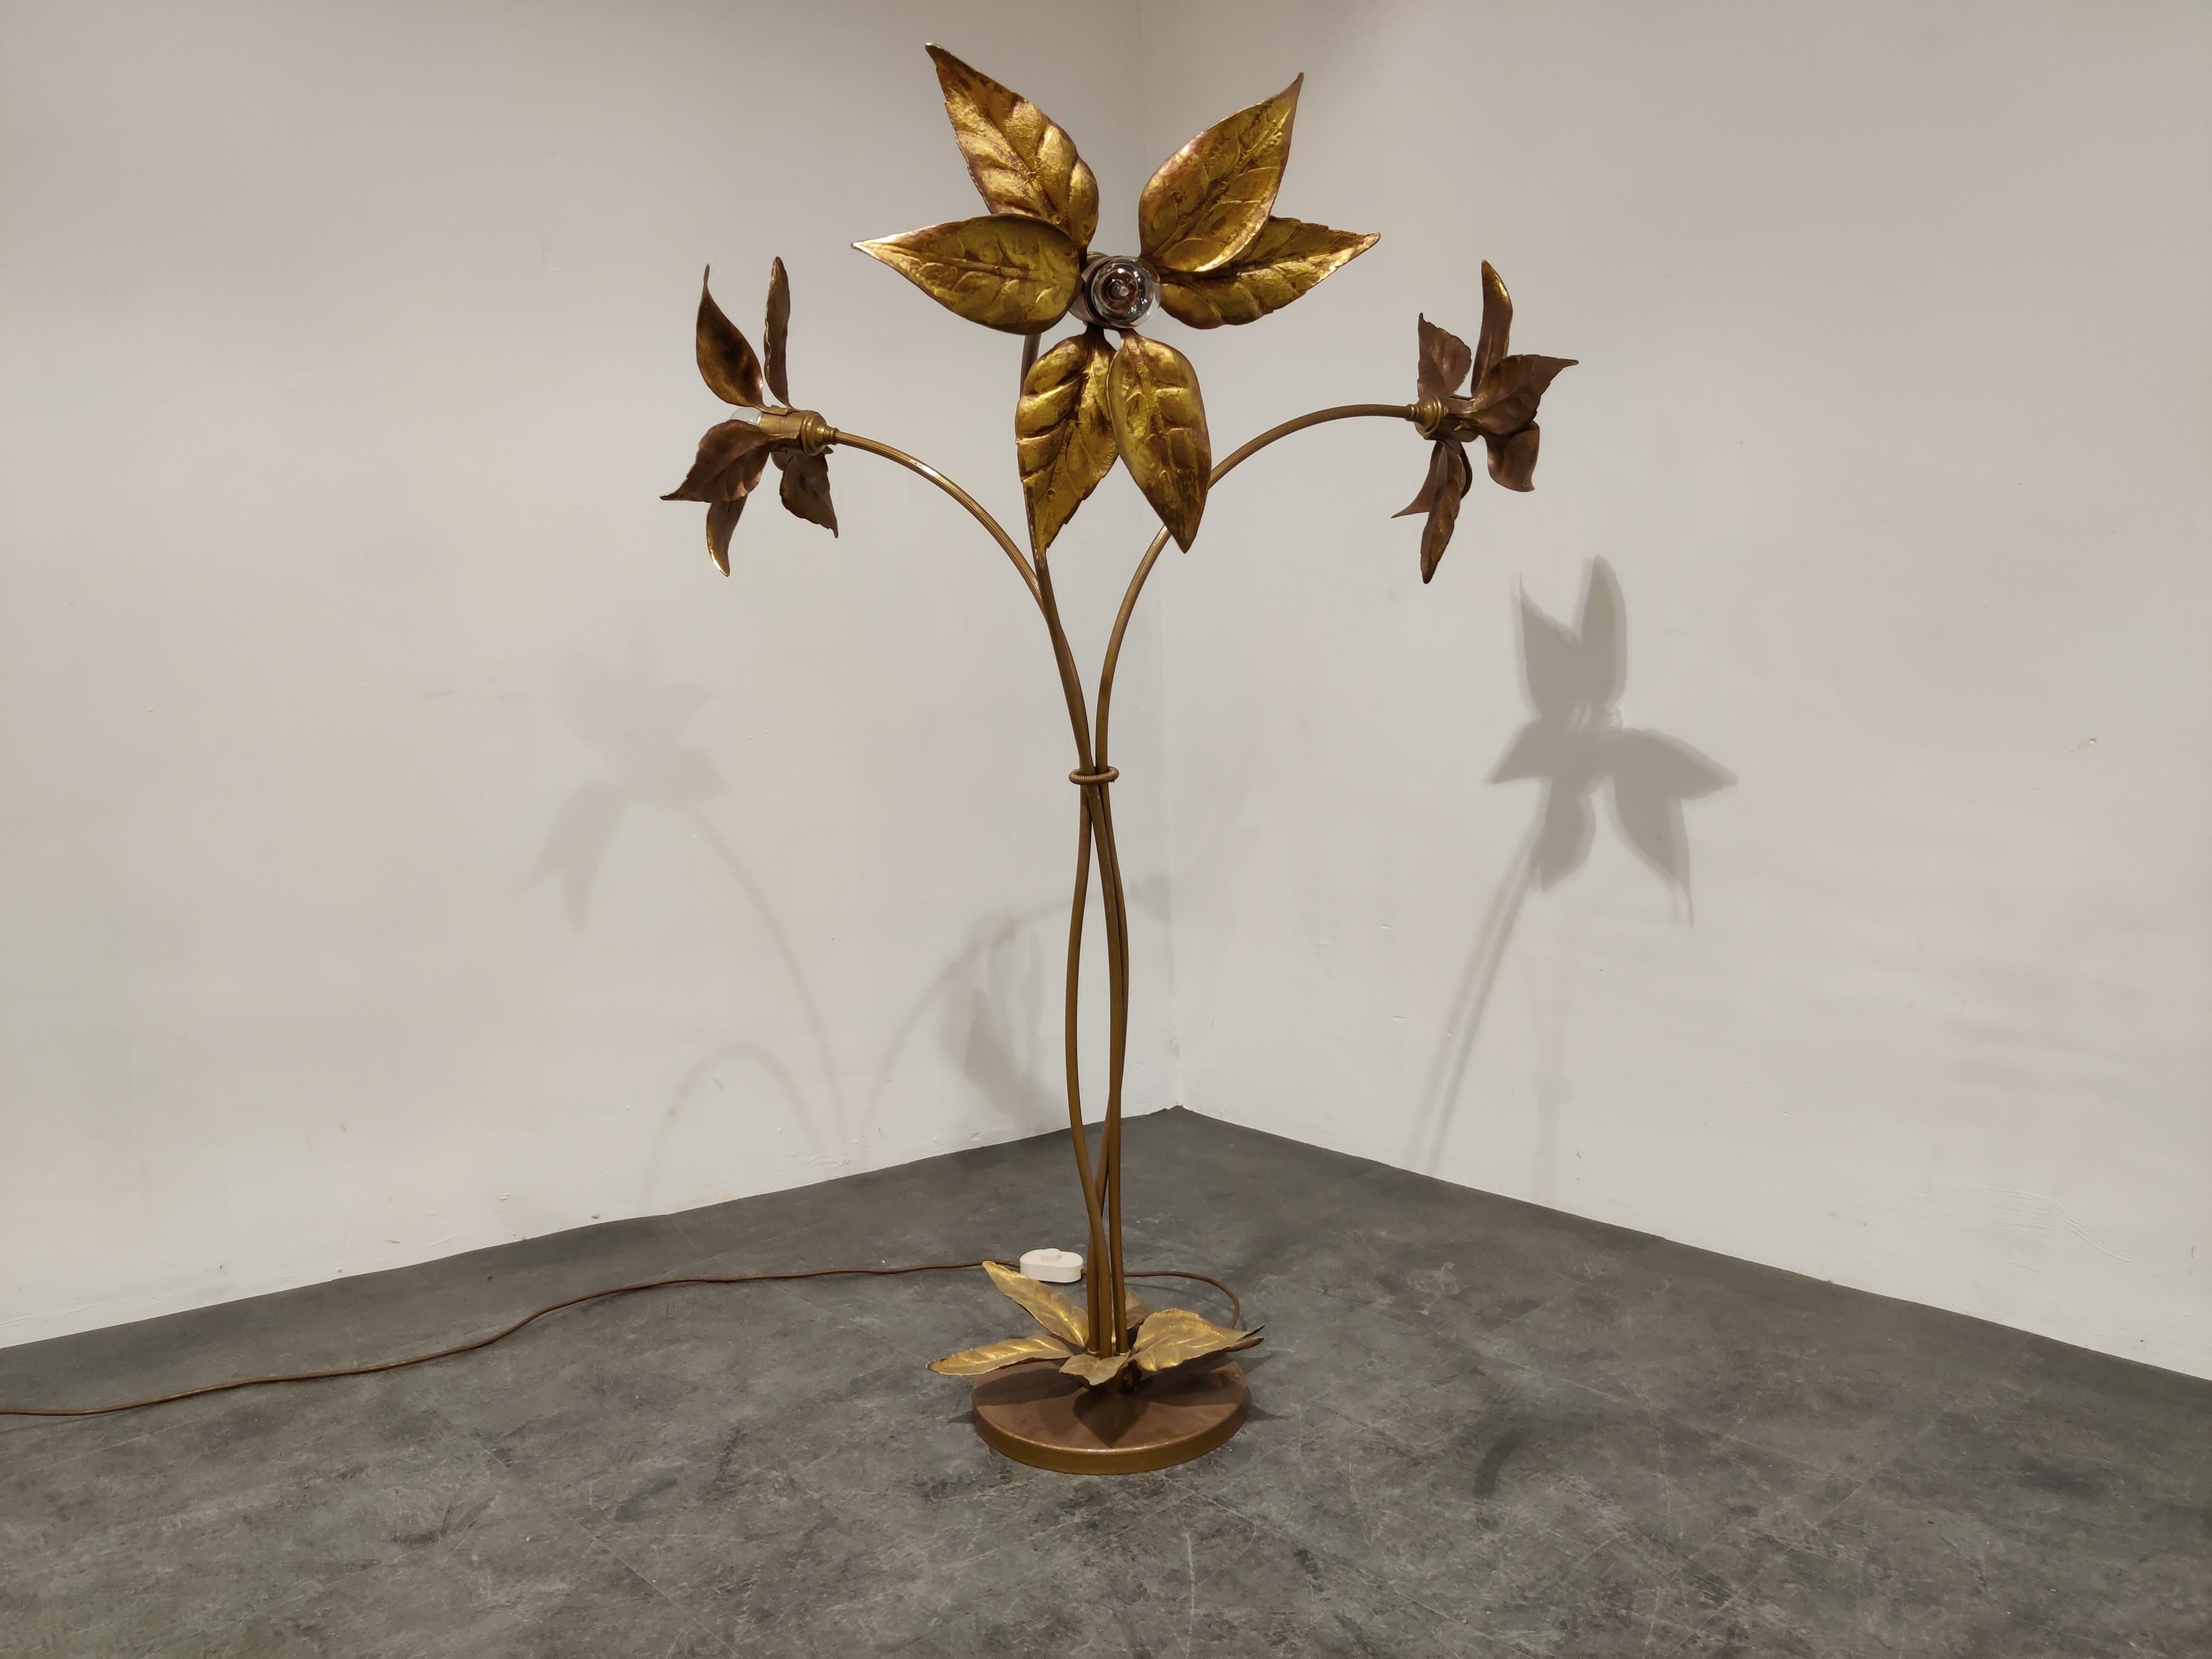 Vintage 3 armed brass flower floor lamp by Willy Daro.

Beautifully detailed leafs.

The lamp also has leafs on the base.

Very good condition, tested and ready to use with regular E26/E27 light bulbs.

1970s, Belgium

Dimensions:
Height